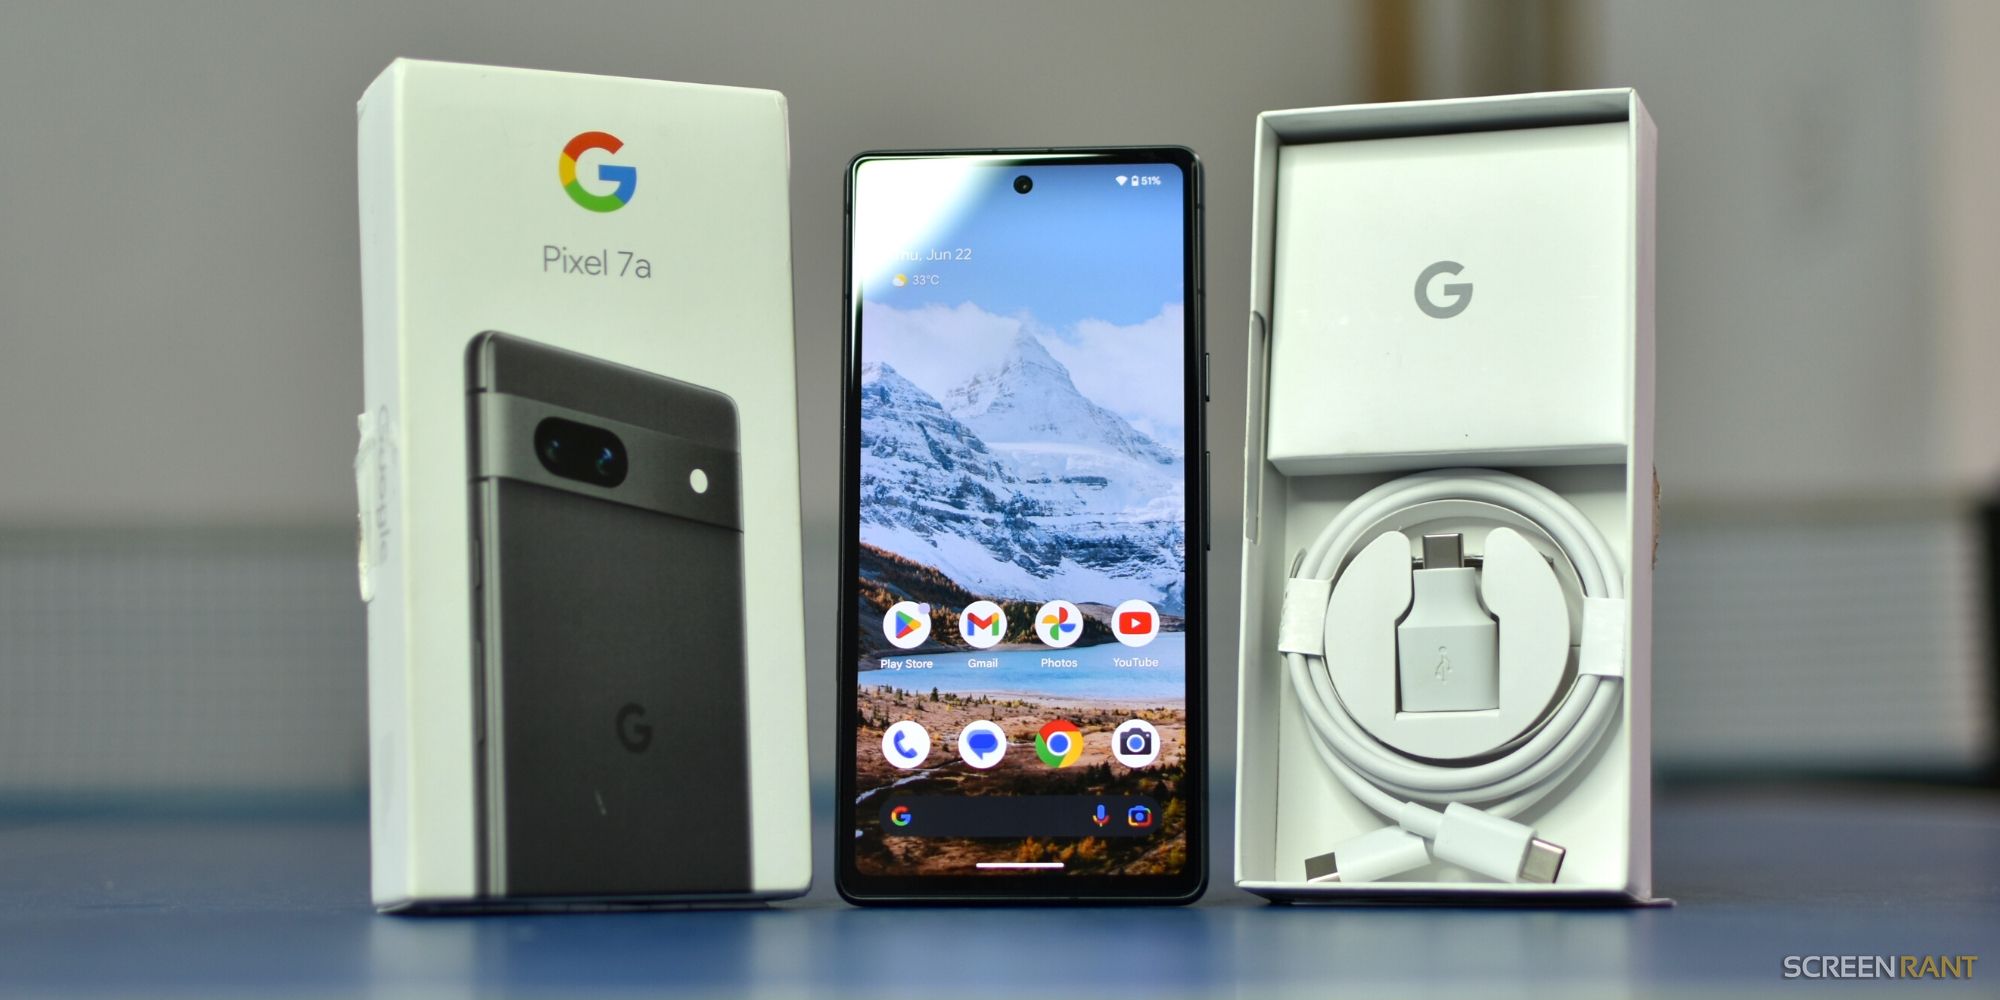 Pixel 7a with its box and accessories